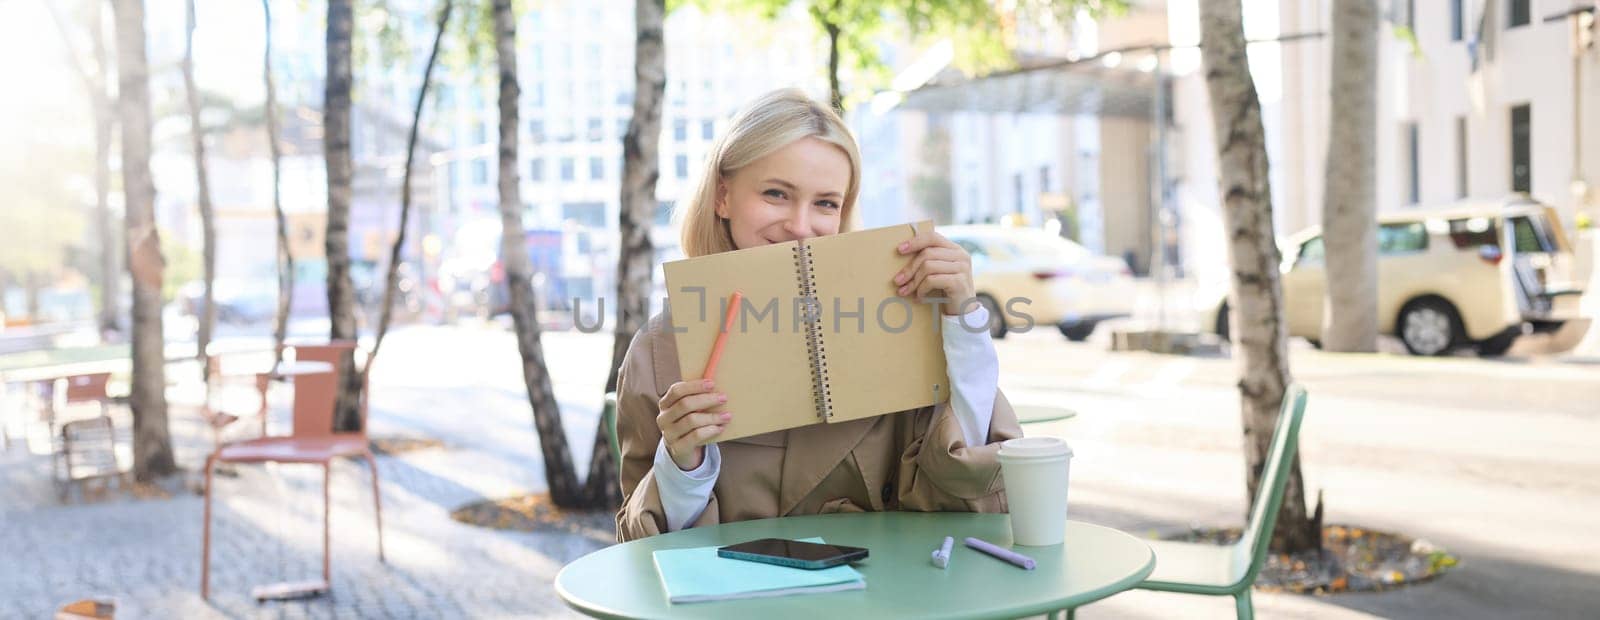 Image of young beautiful woman, student doing homework in an outdoor coffee shop, holding journal or planner, writing in notebook, smiling happily by Benzoix